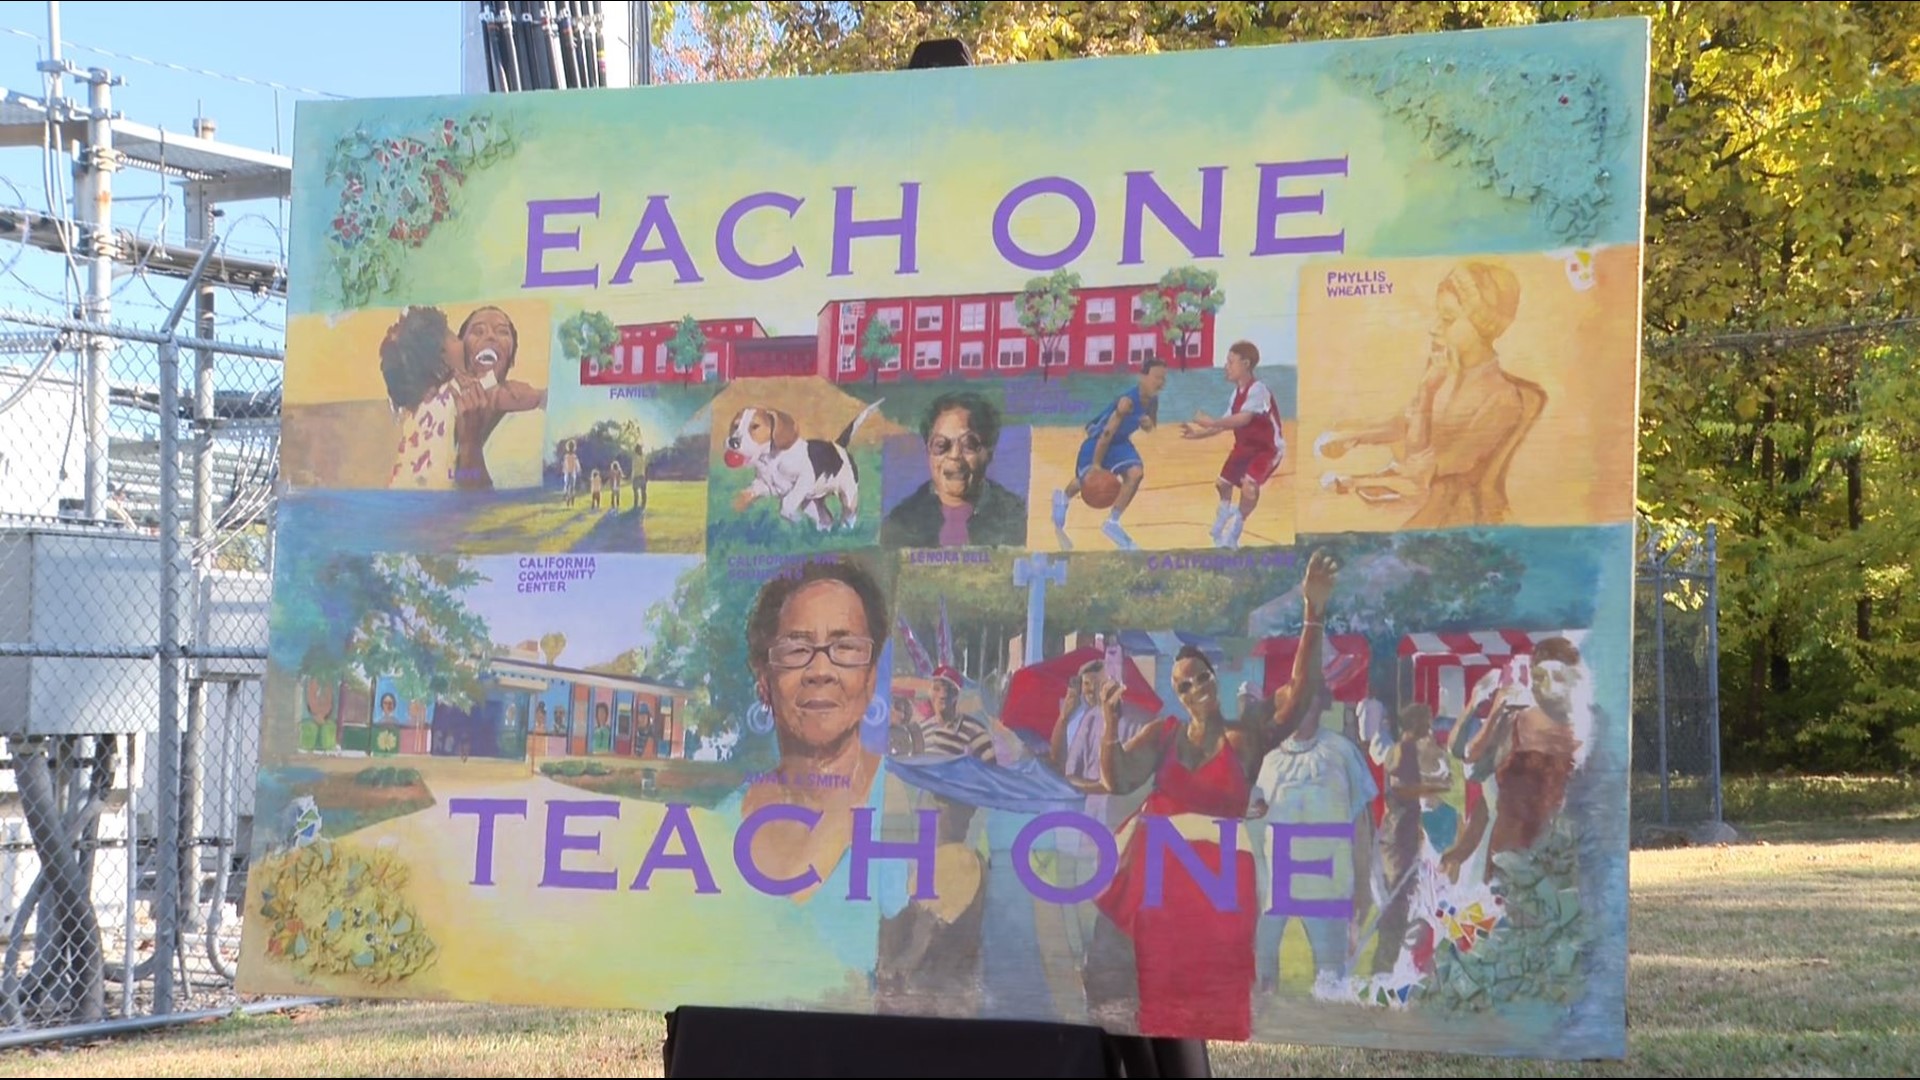 The "Each One, Teach One" piece reflects the message of offering everyone in the community with opportunities to learn.